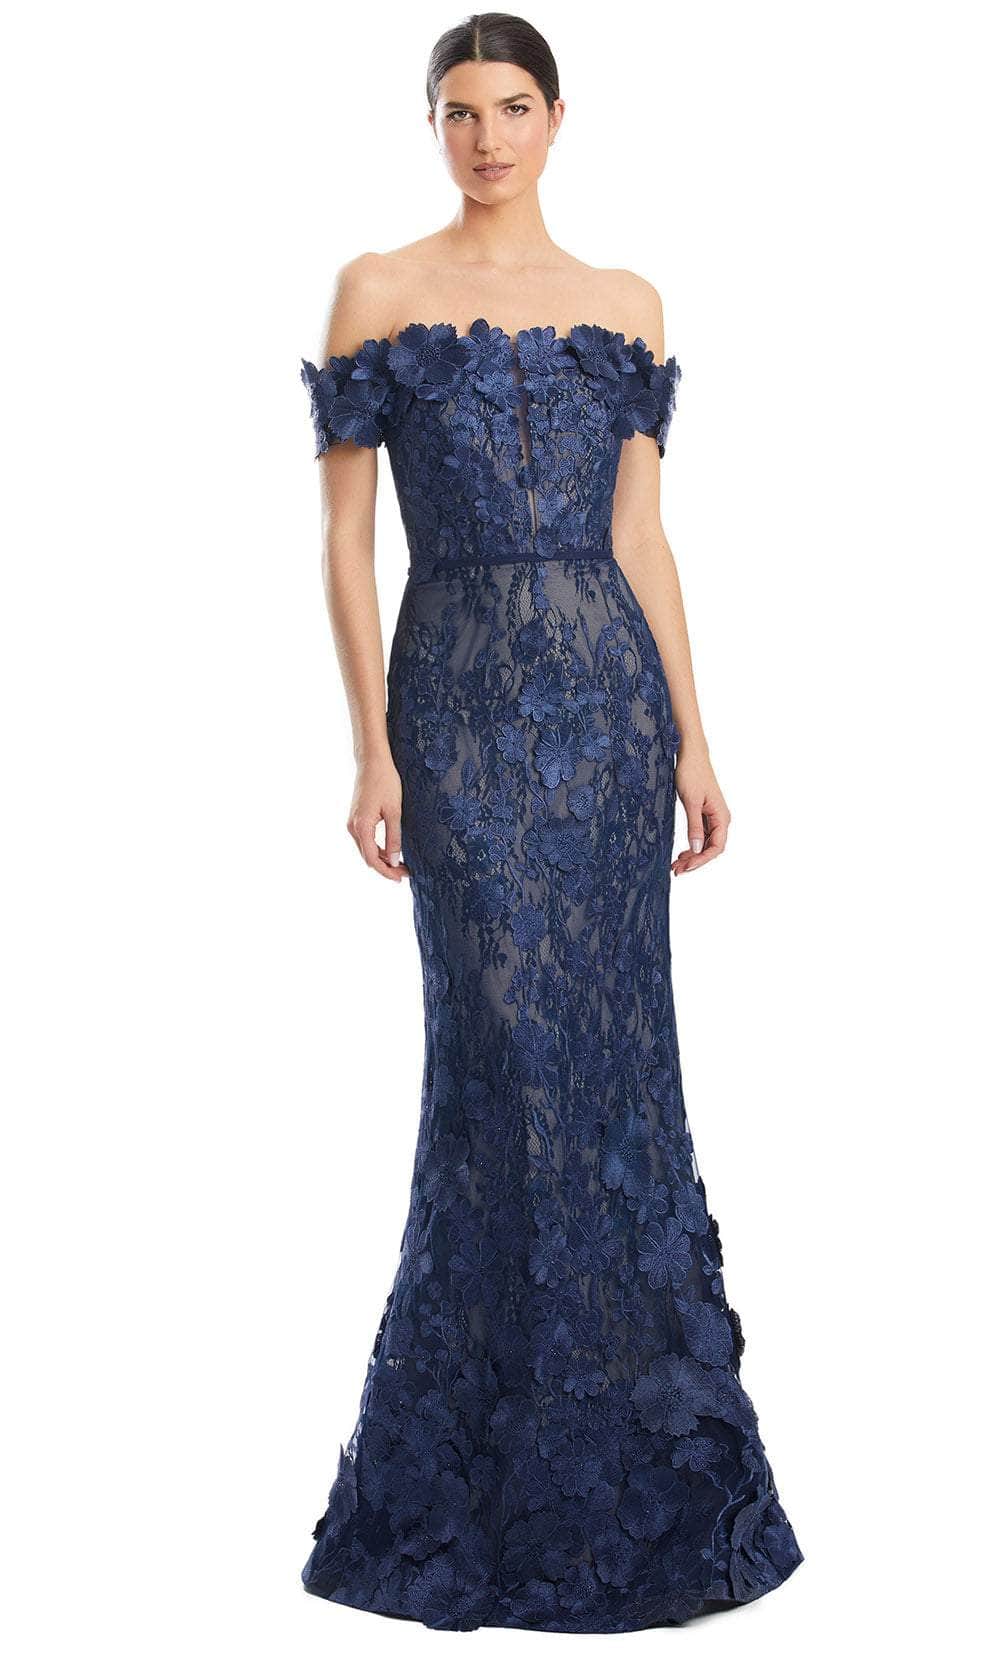 Alexander by Daymor 1971S24 - Lace Applique Off Shoulder Prom Gown
